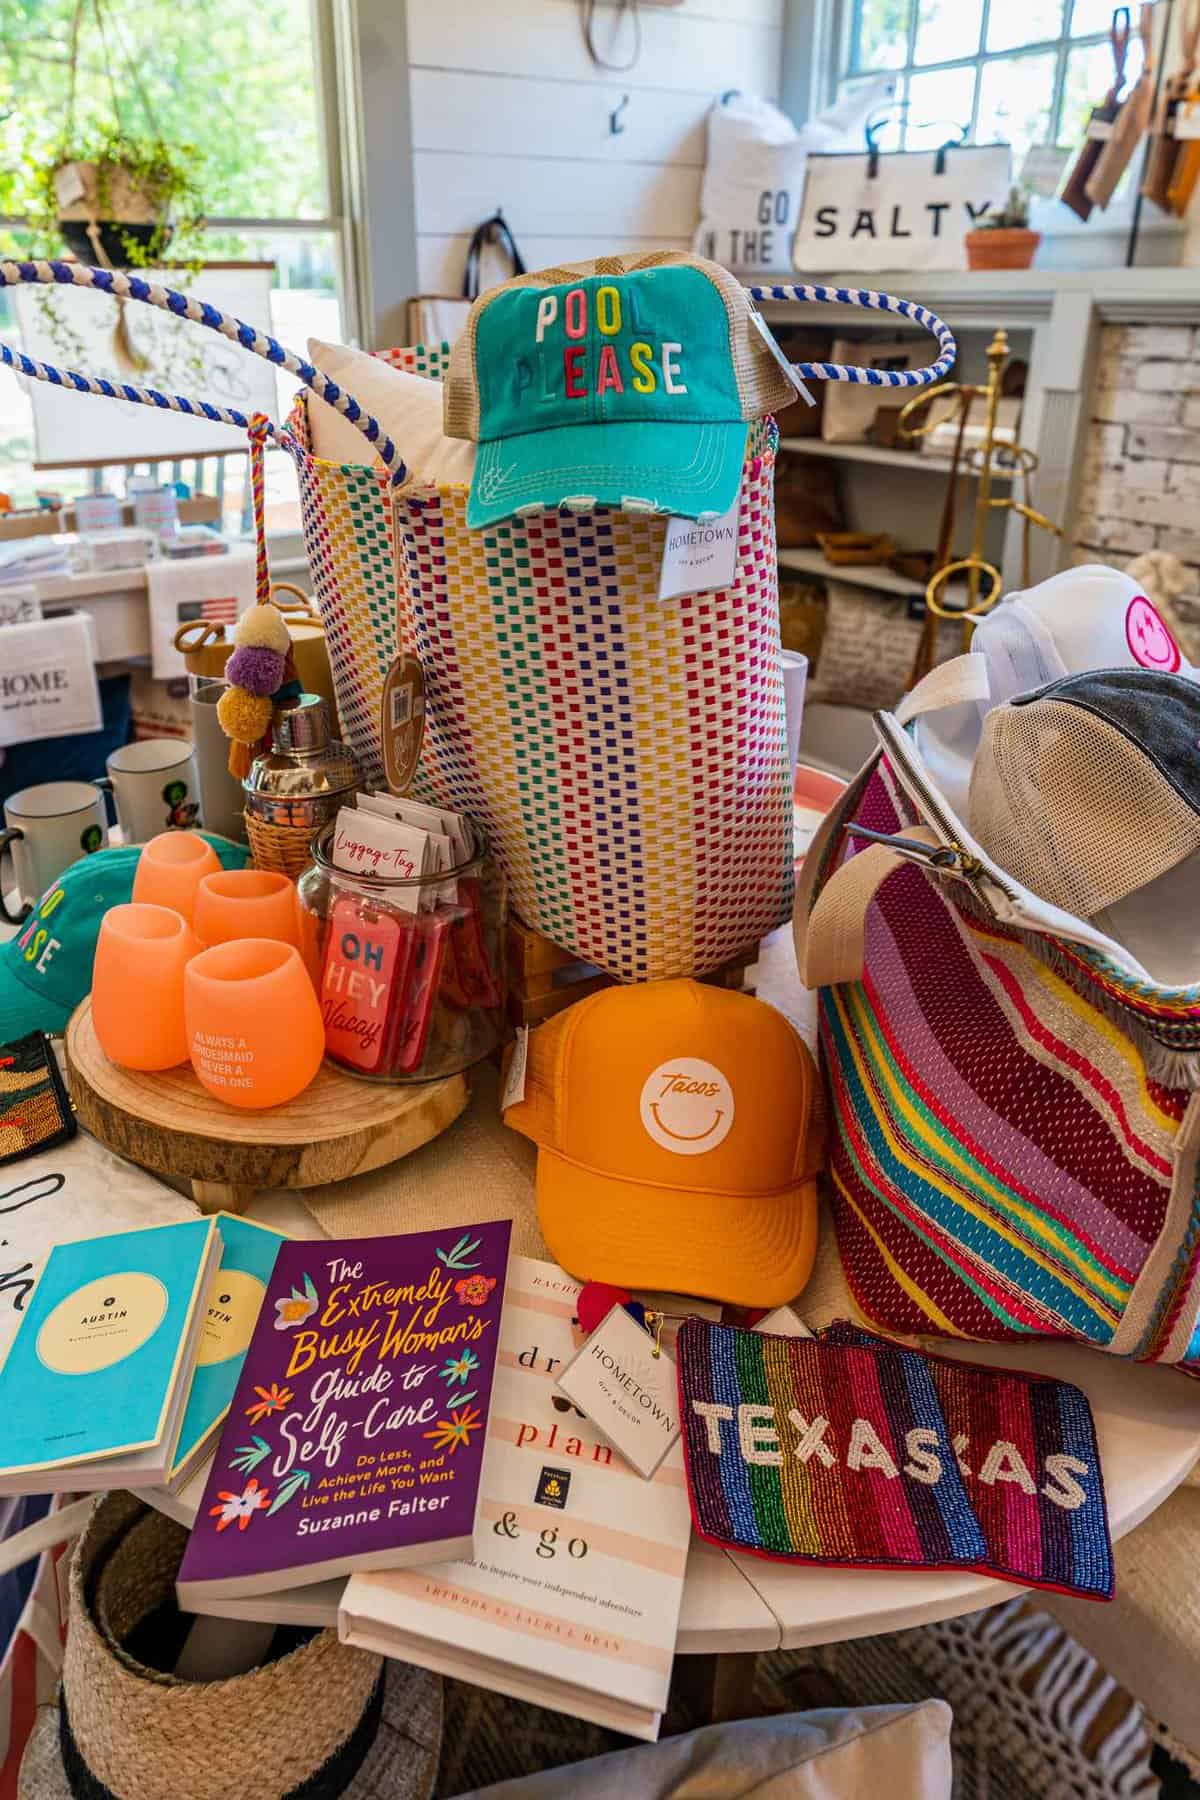 Boutique products on display